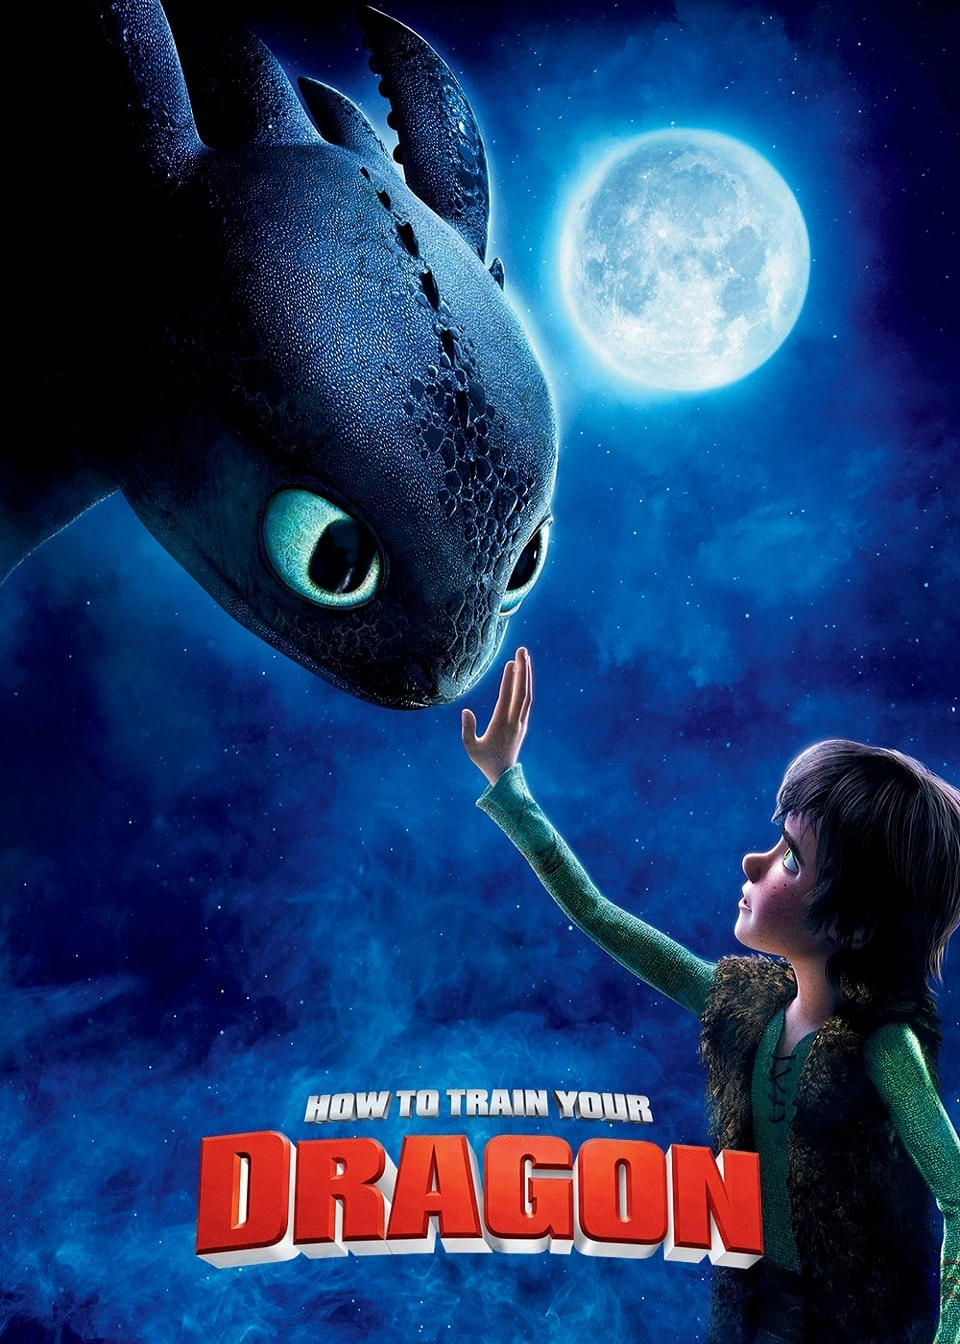 Poster Phim How to Train Your Dragon (How to Train Your Dragon)